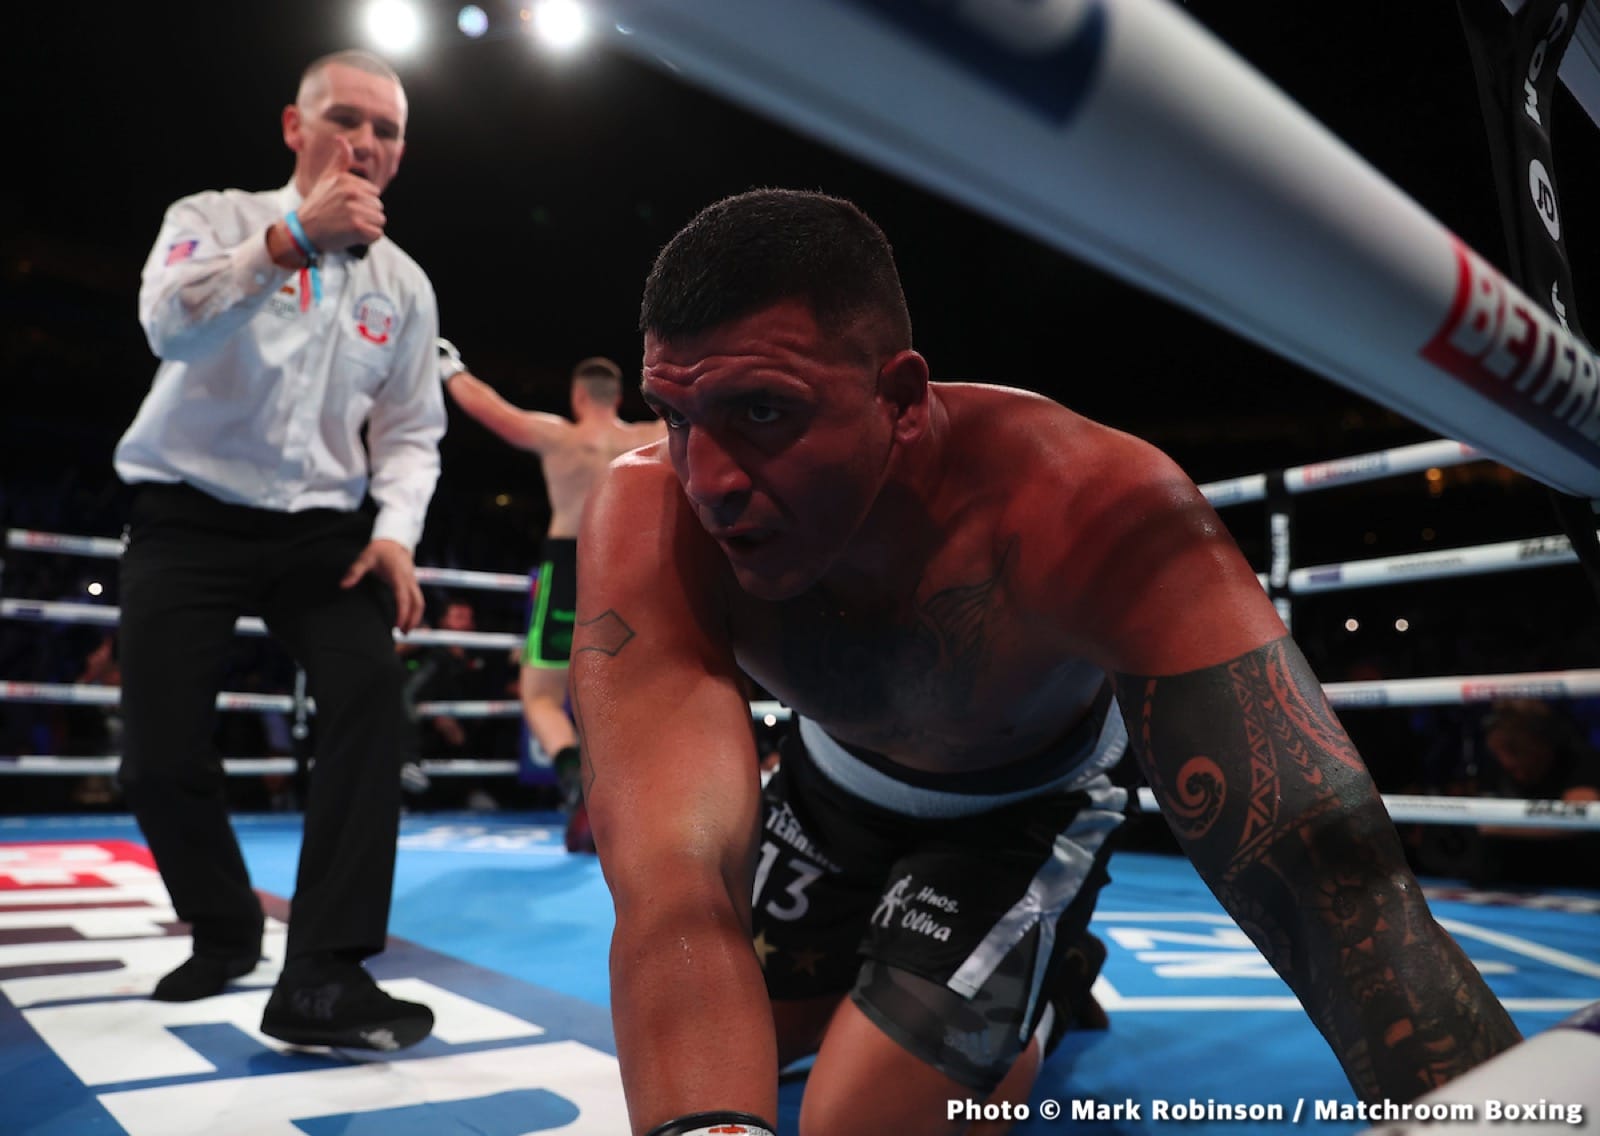 Image: Cameron Defeats McGee, Babic Stops Molina - Live Results From London, UK